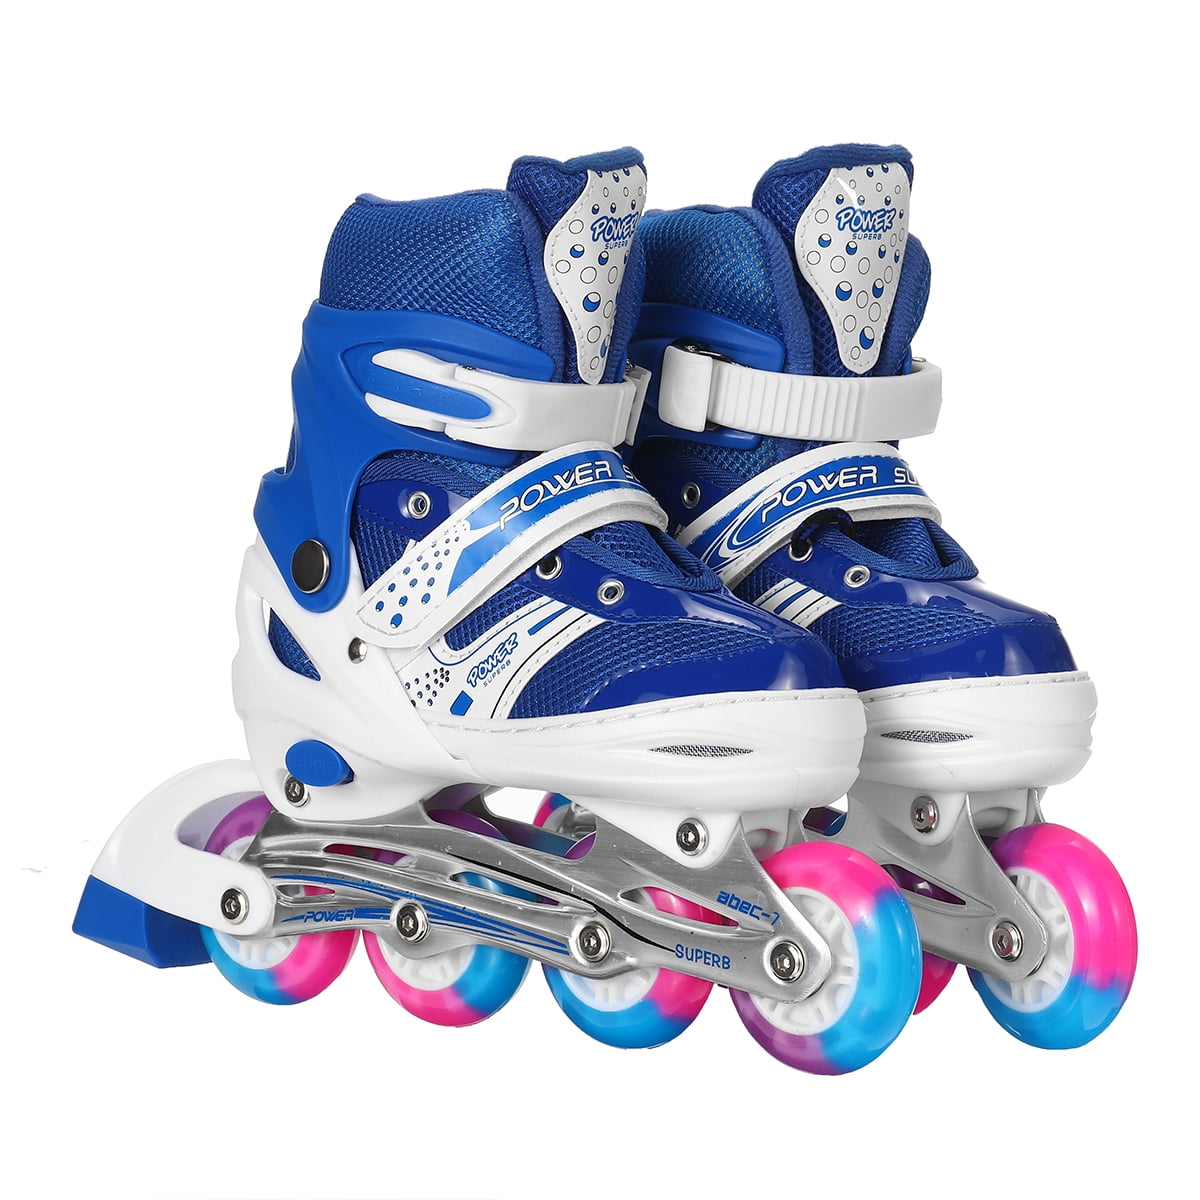 Nattork Adjustable Inline Skates for Kids and Adult with Light Up Wheel Outdoor & Indoor Illuminating Roller Skates for Girls and Boys,Beginners